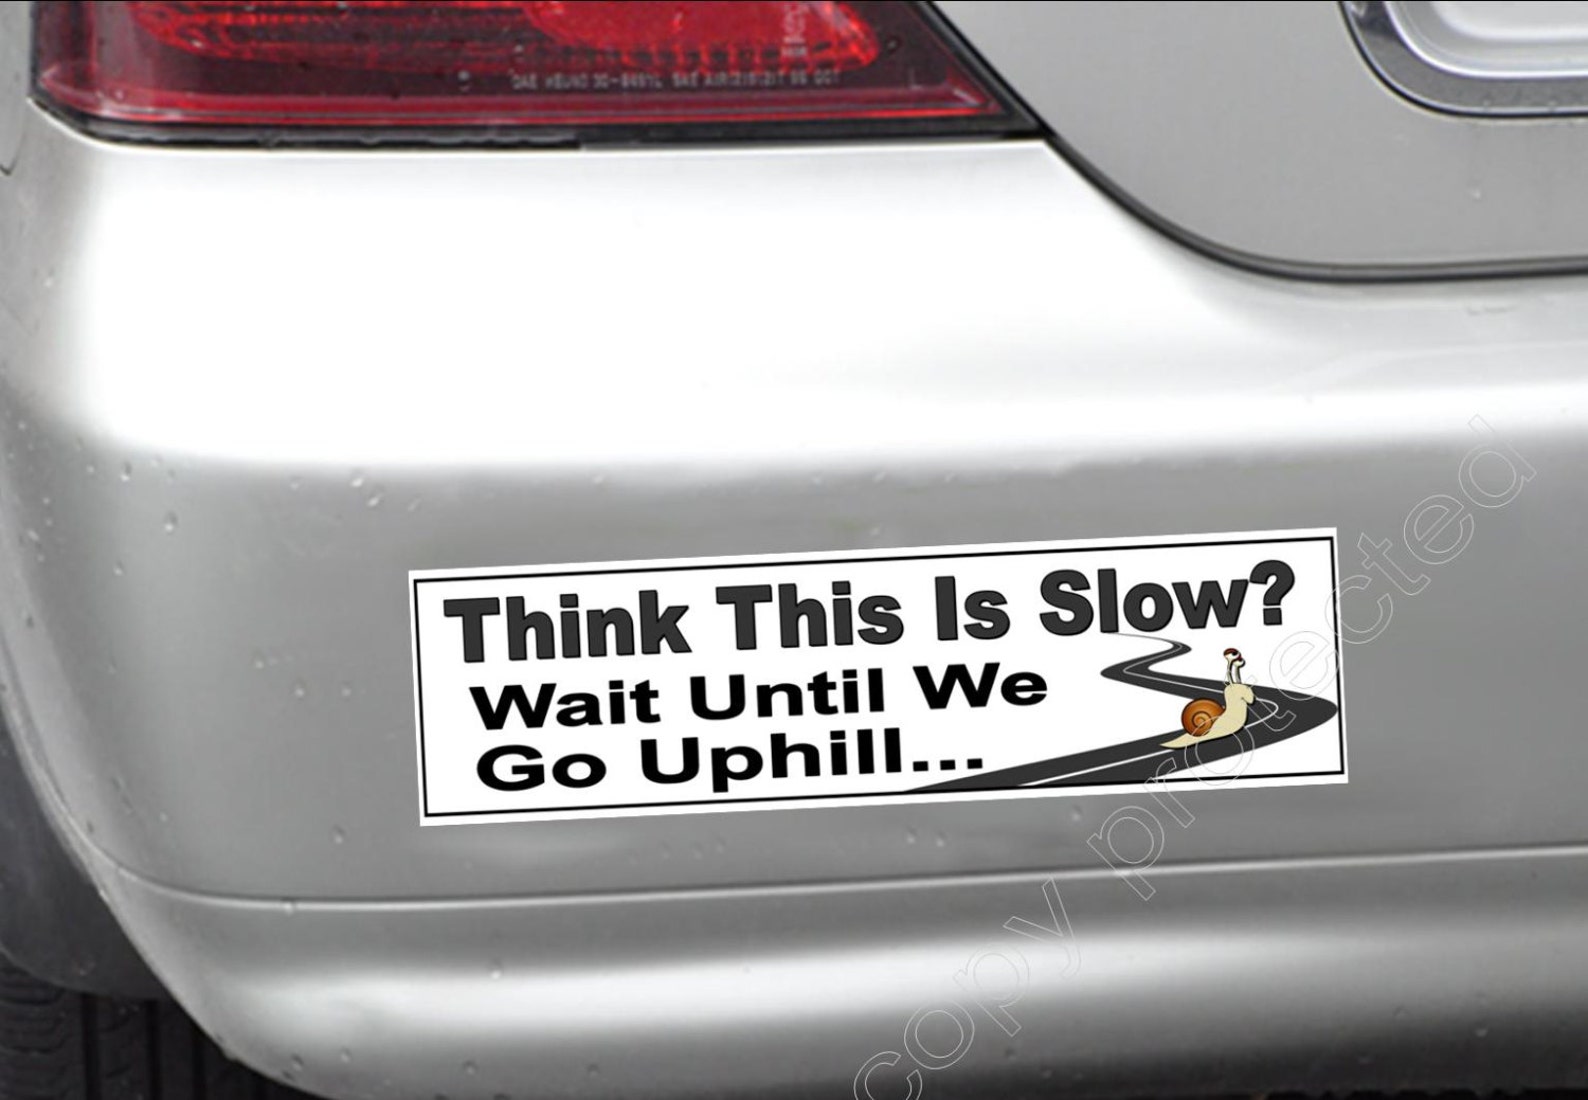 Funny bumper sticker old and slow cars. Think this is slow | Etsy